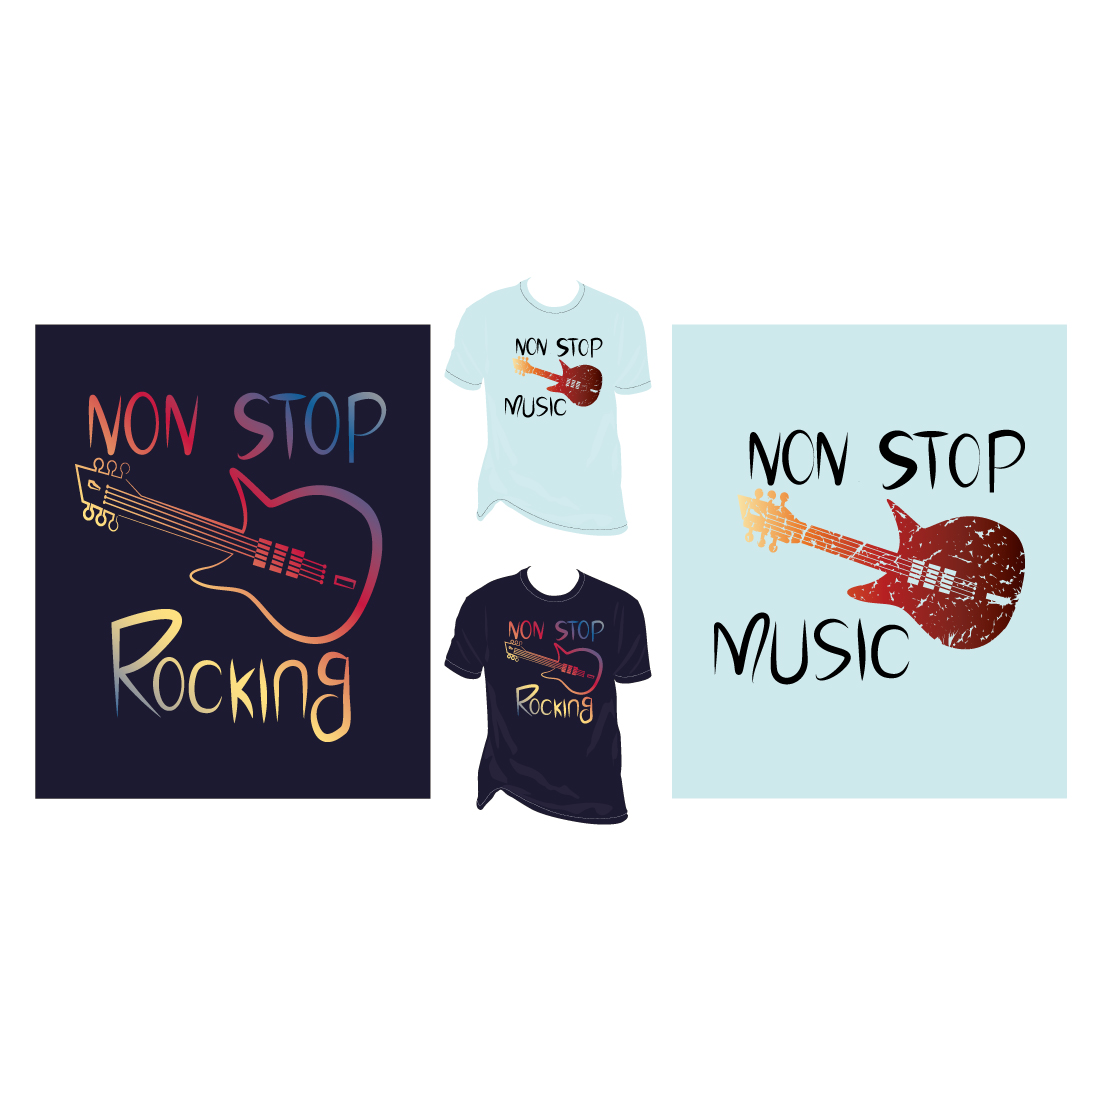 Non Stop Rocking Hand Draw Guitar Typography logotype T Shirt Design set cover image.